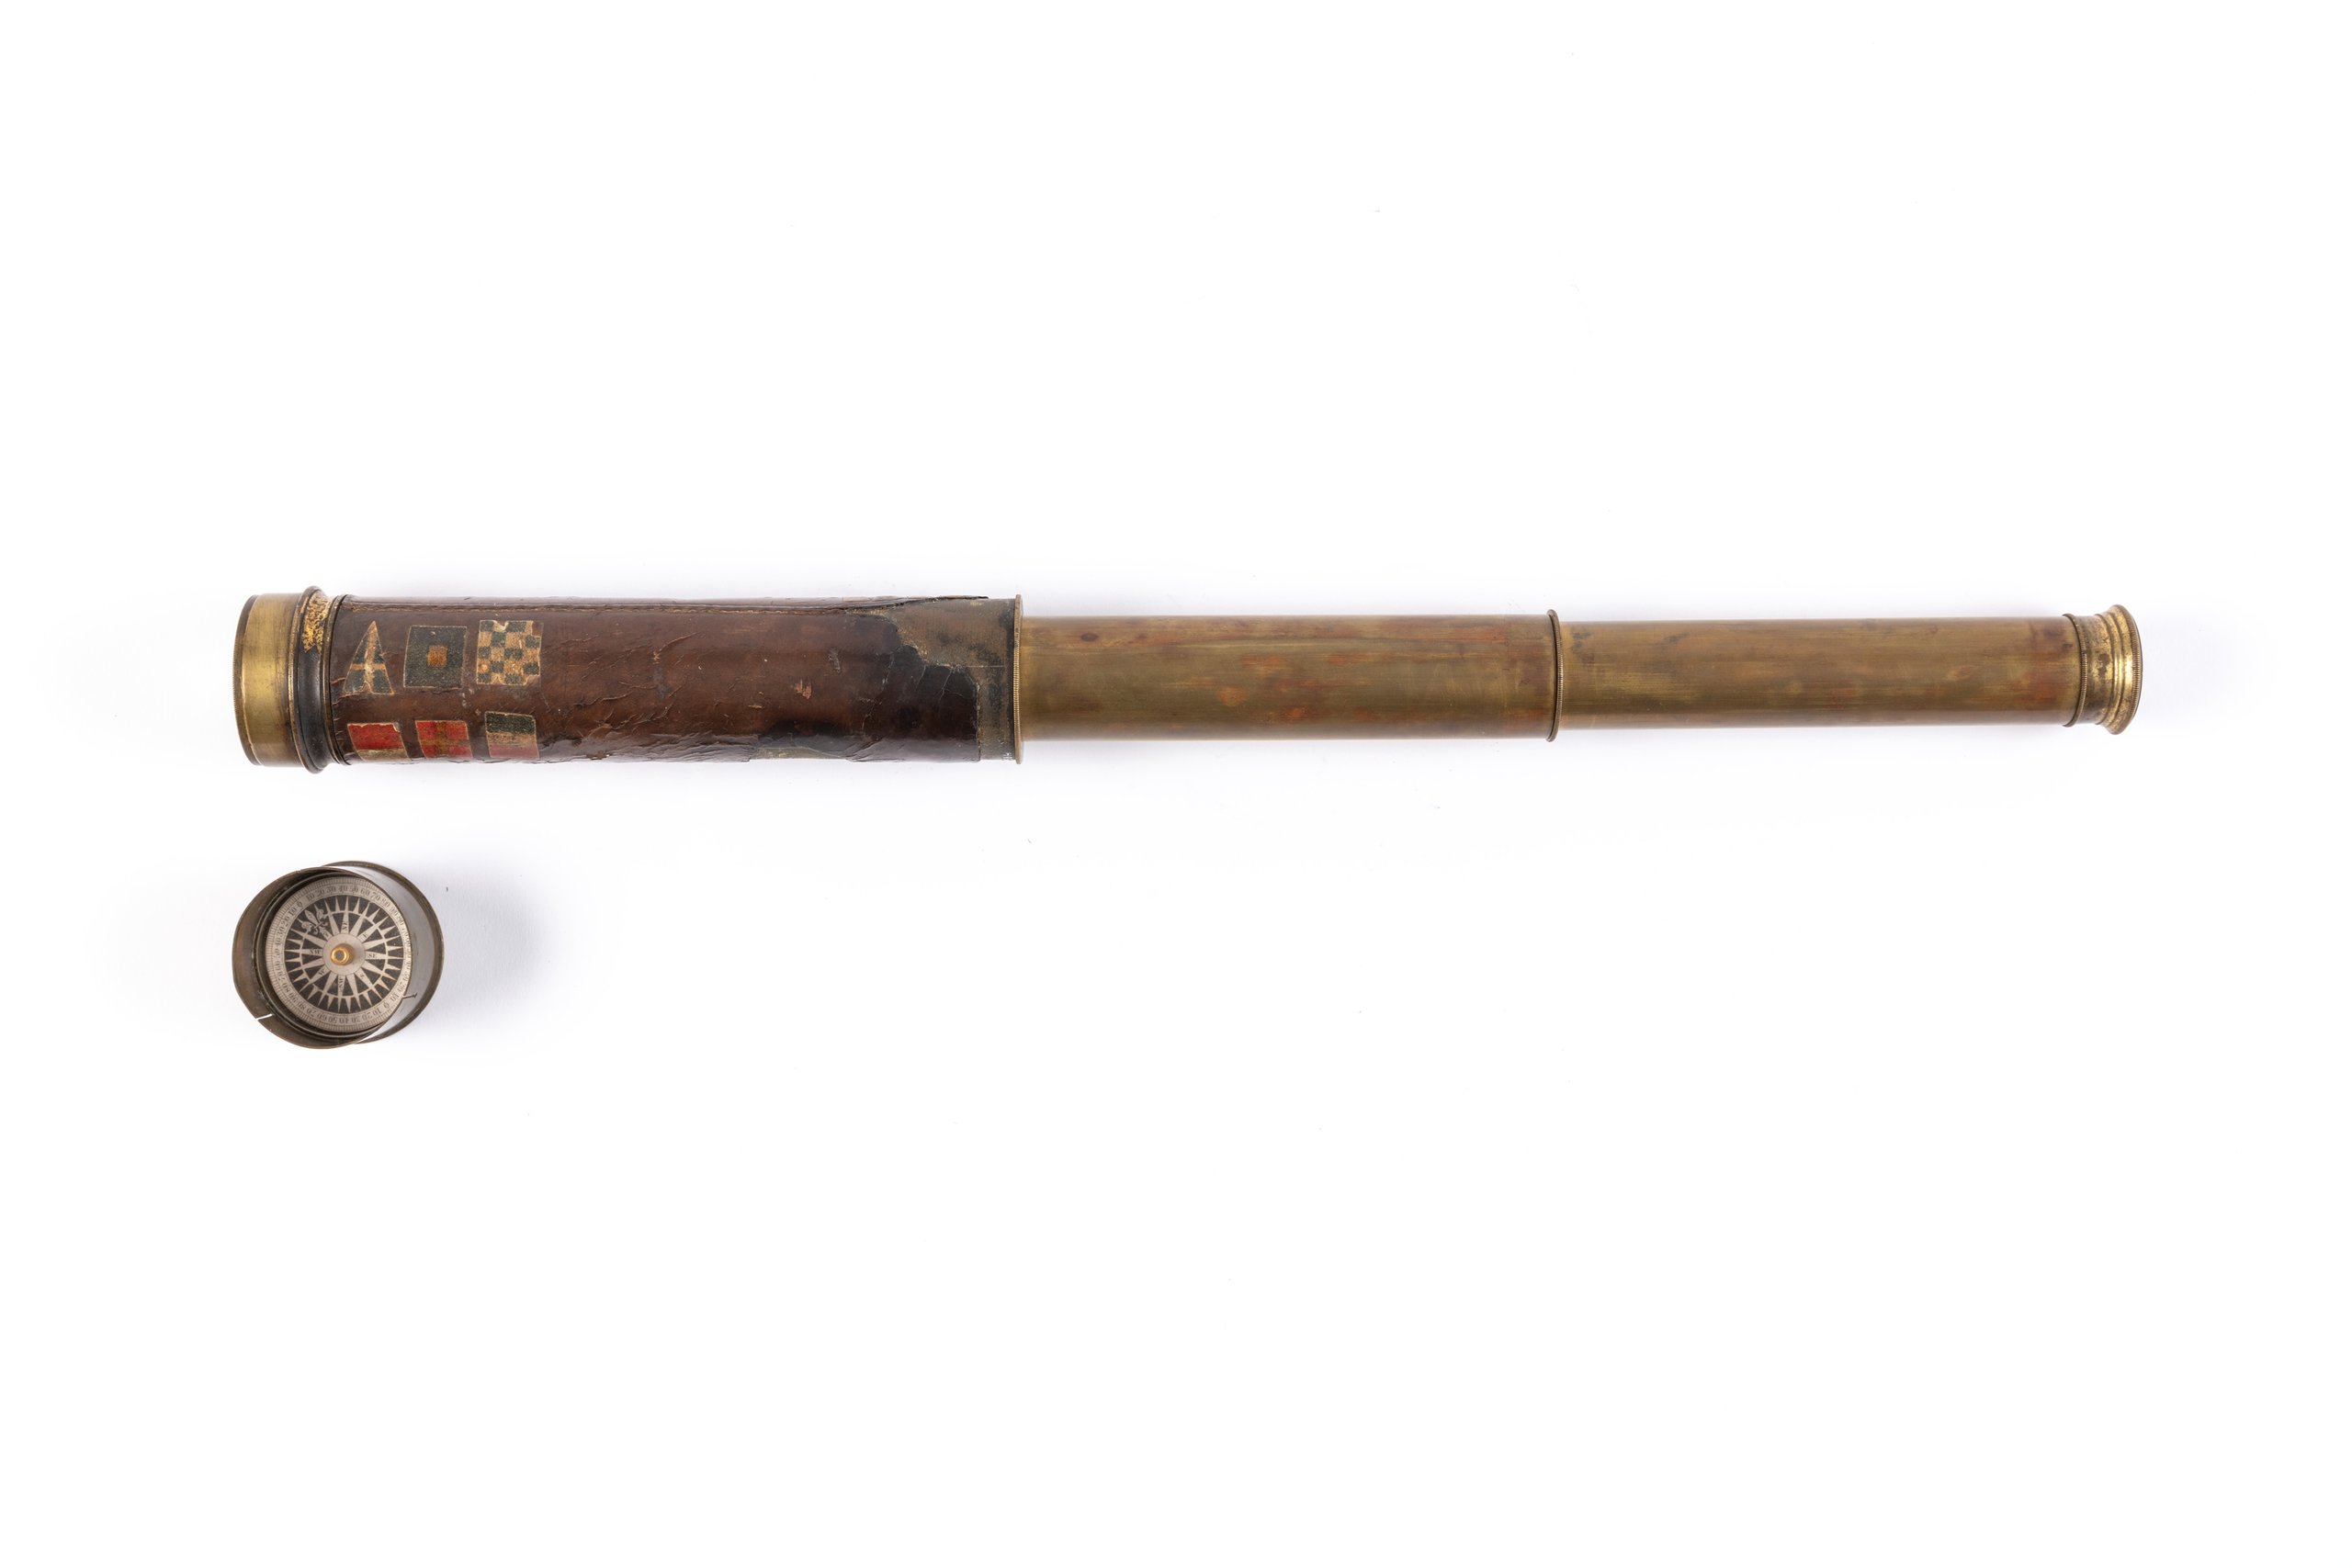 Refracting telescope made by Thomas Harris & Son